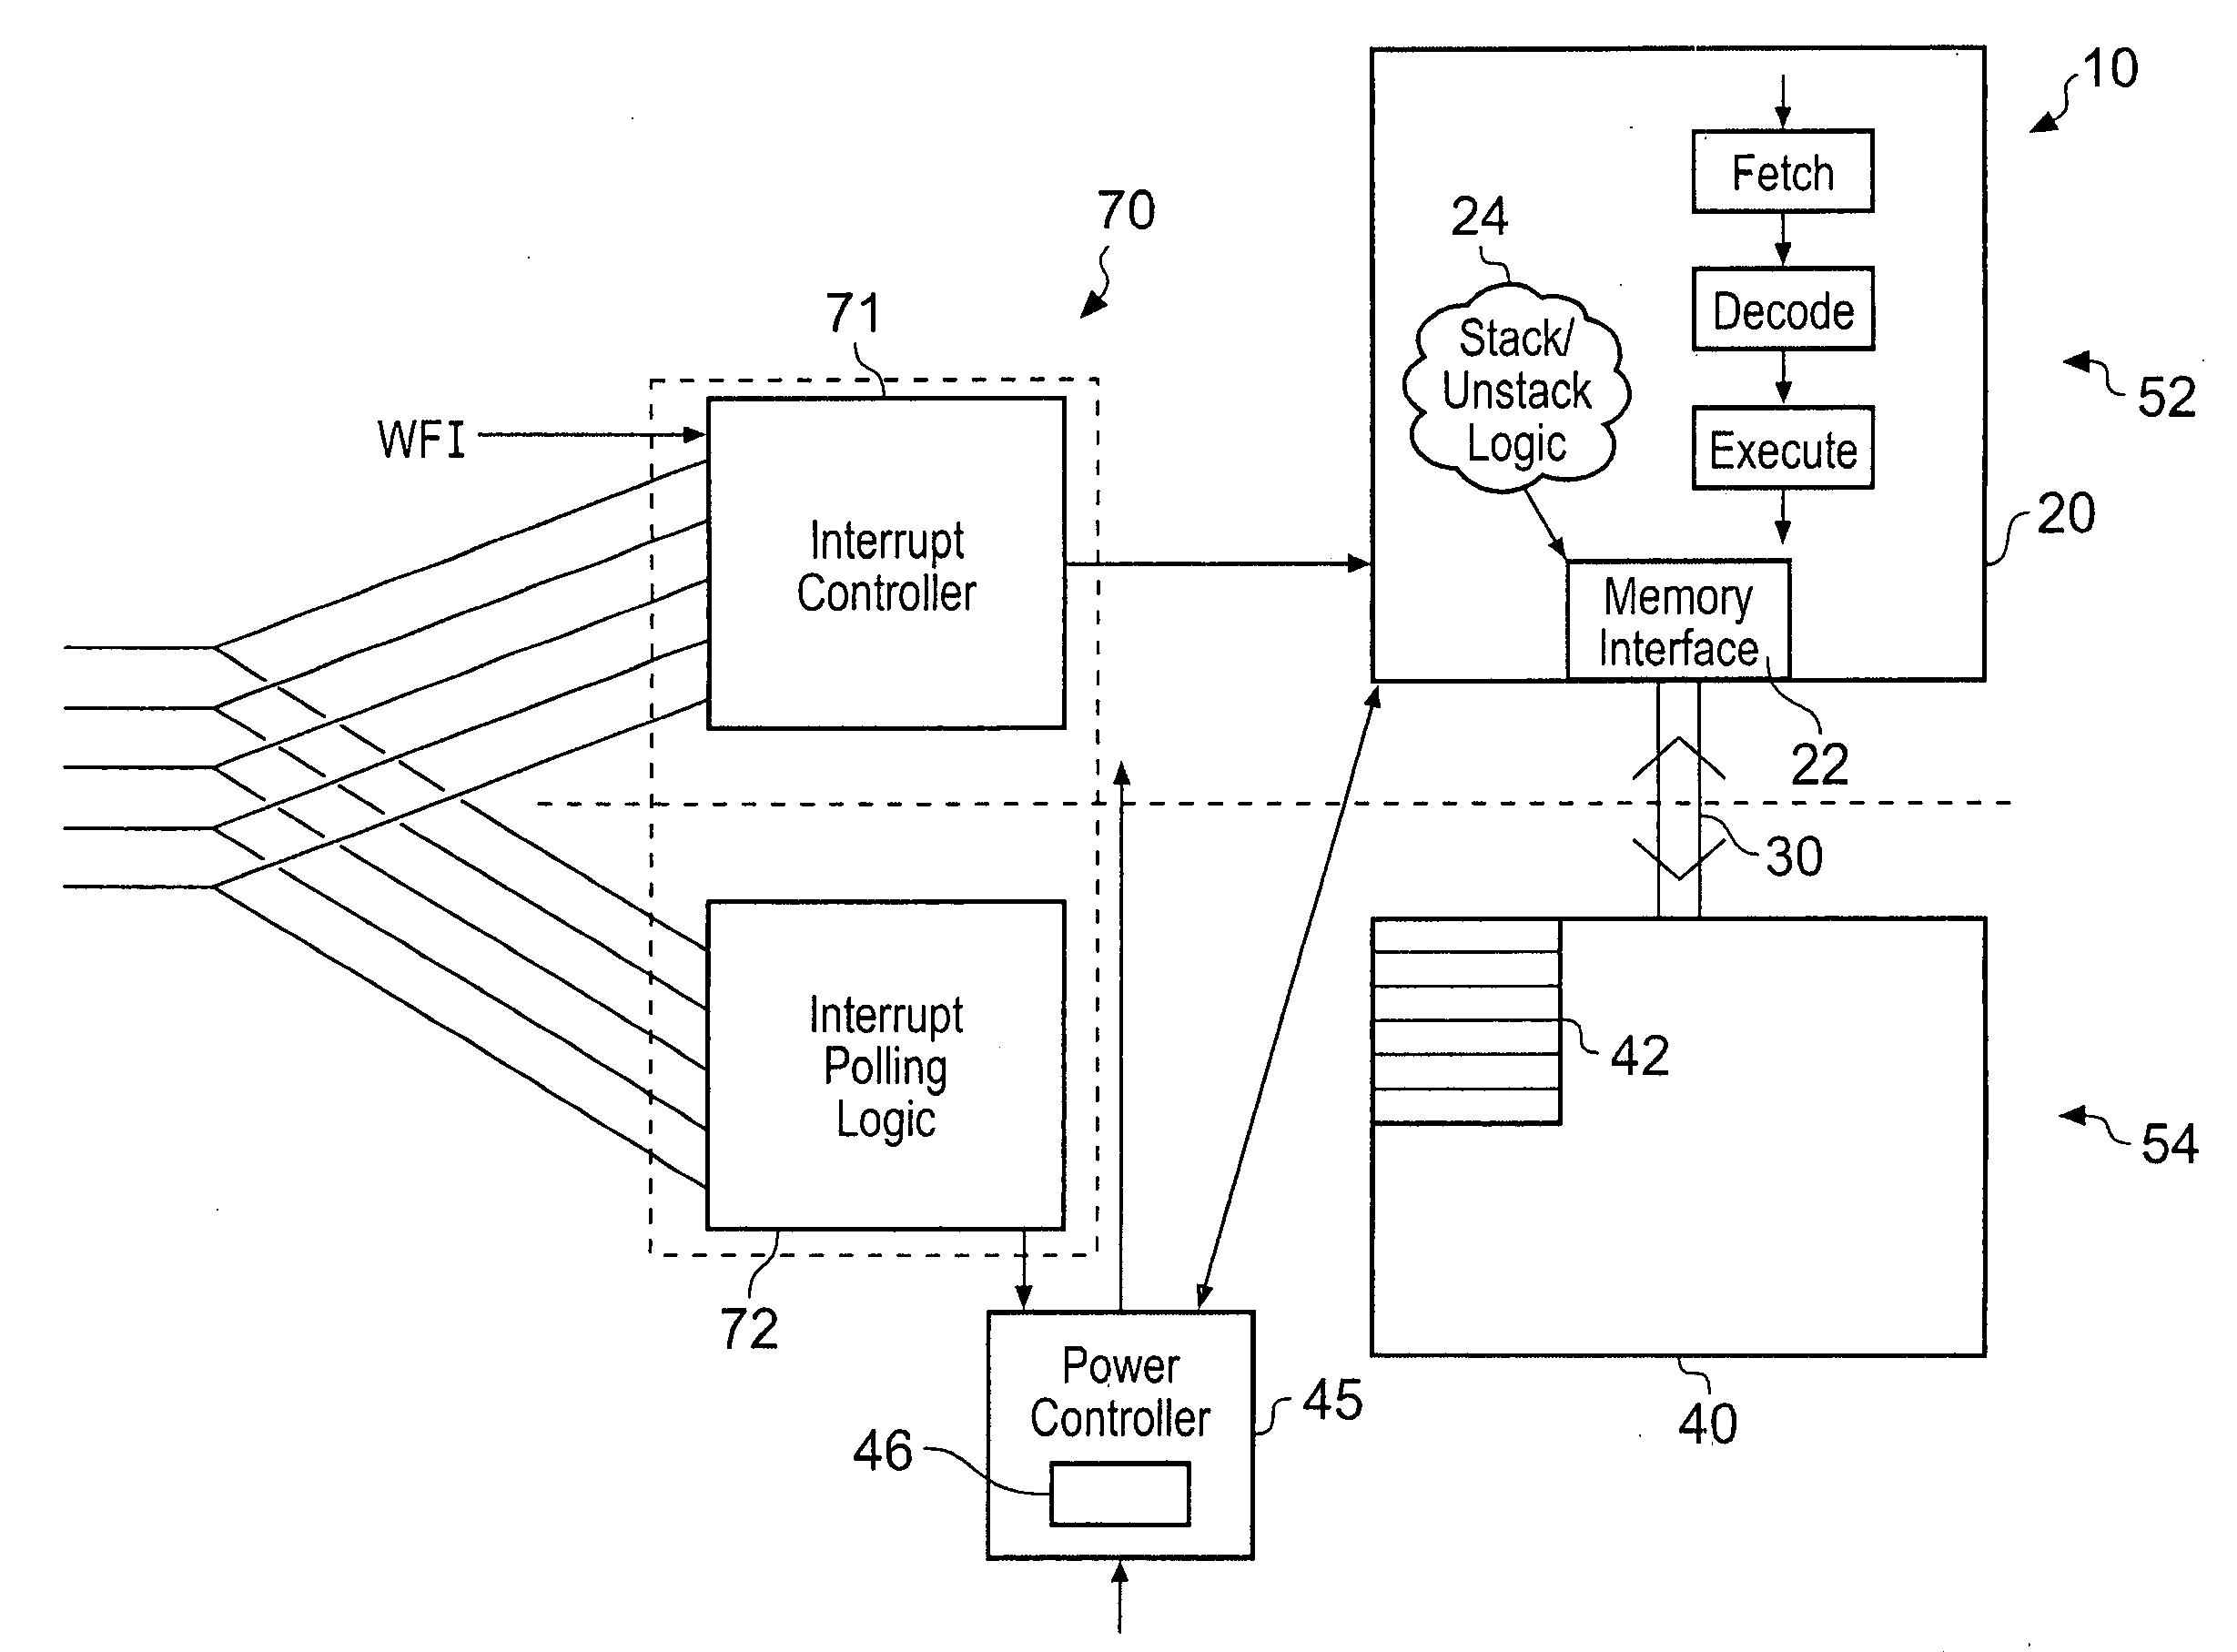 Hardware driven processor state storage prior to entering a low power mode